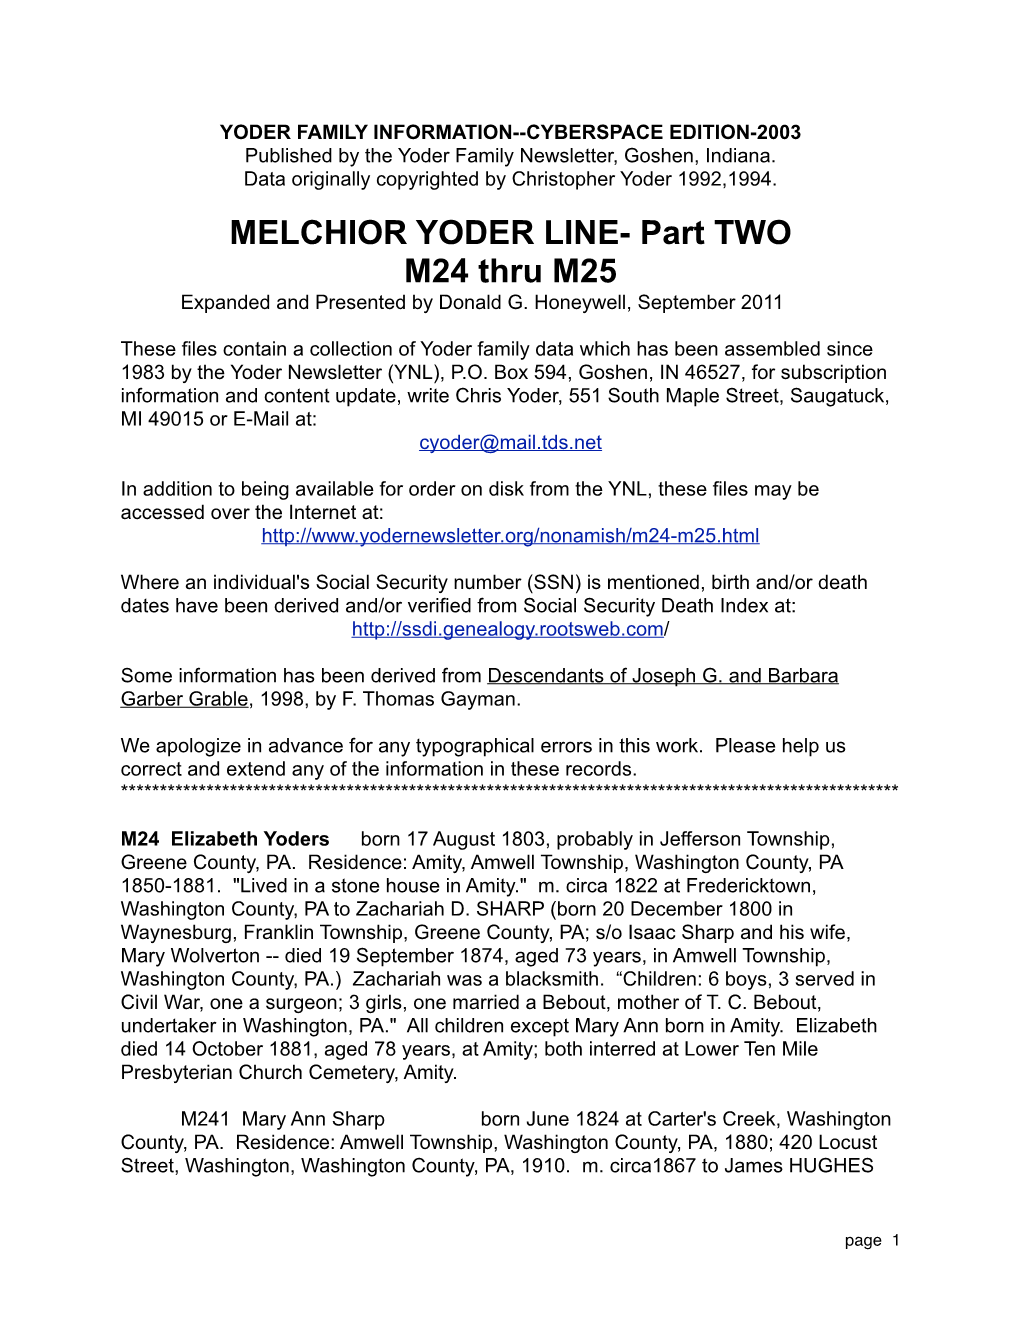 MELCHIOR YODER LINE- Part TWO M24 Thru M25 Expanded and Presented by Donald G